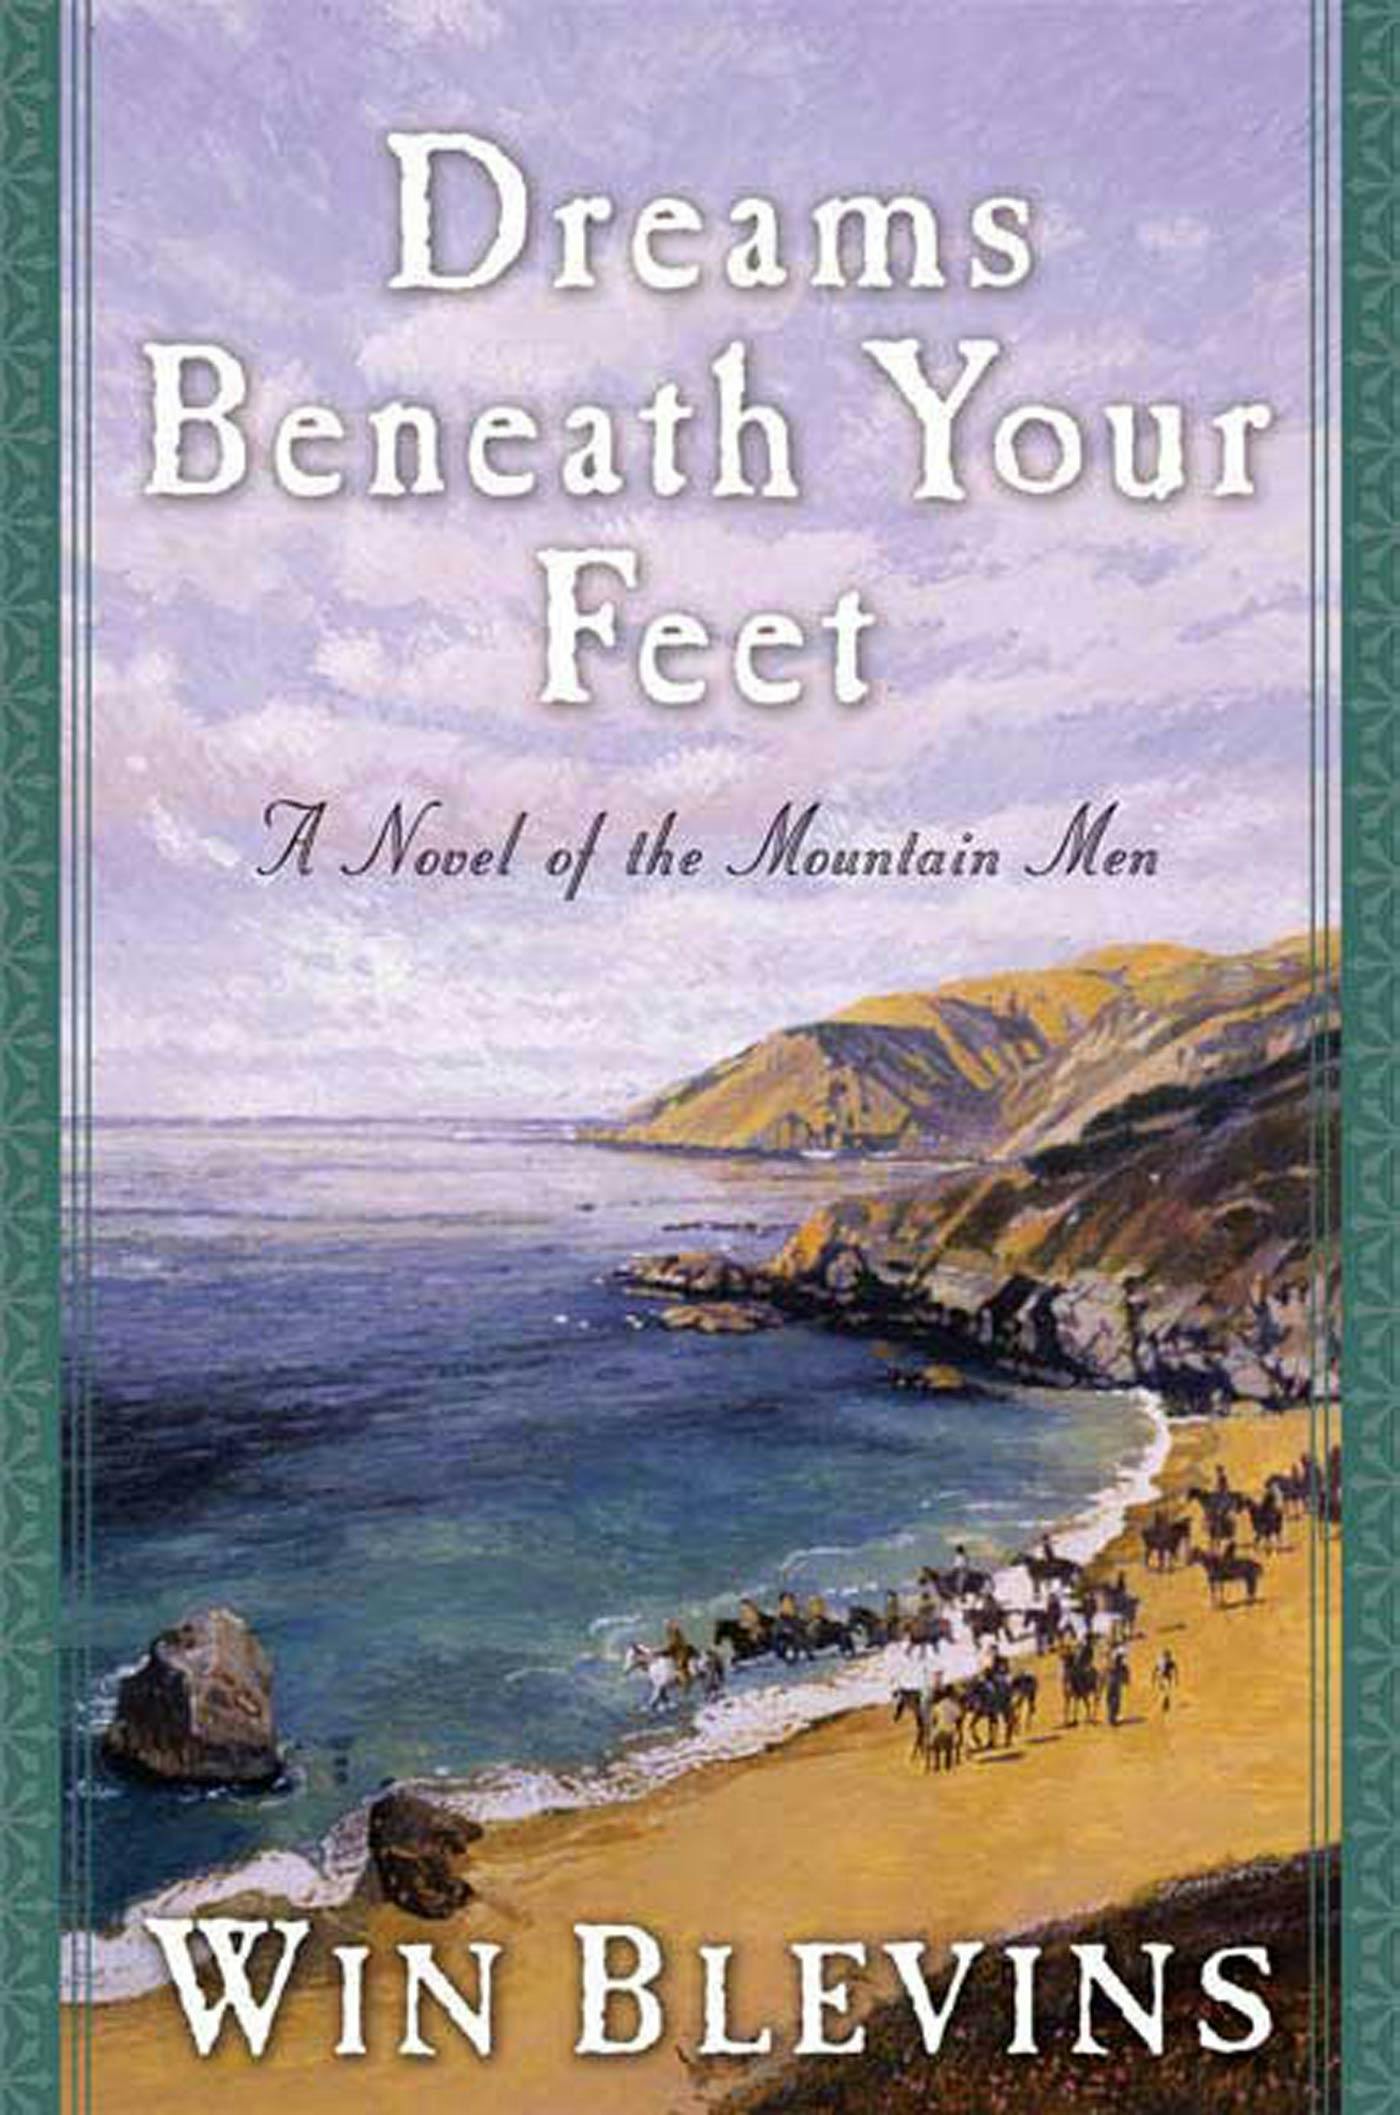 Cover for the book titled as: Dreams Beneath Your Feet